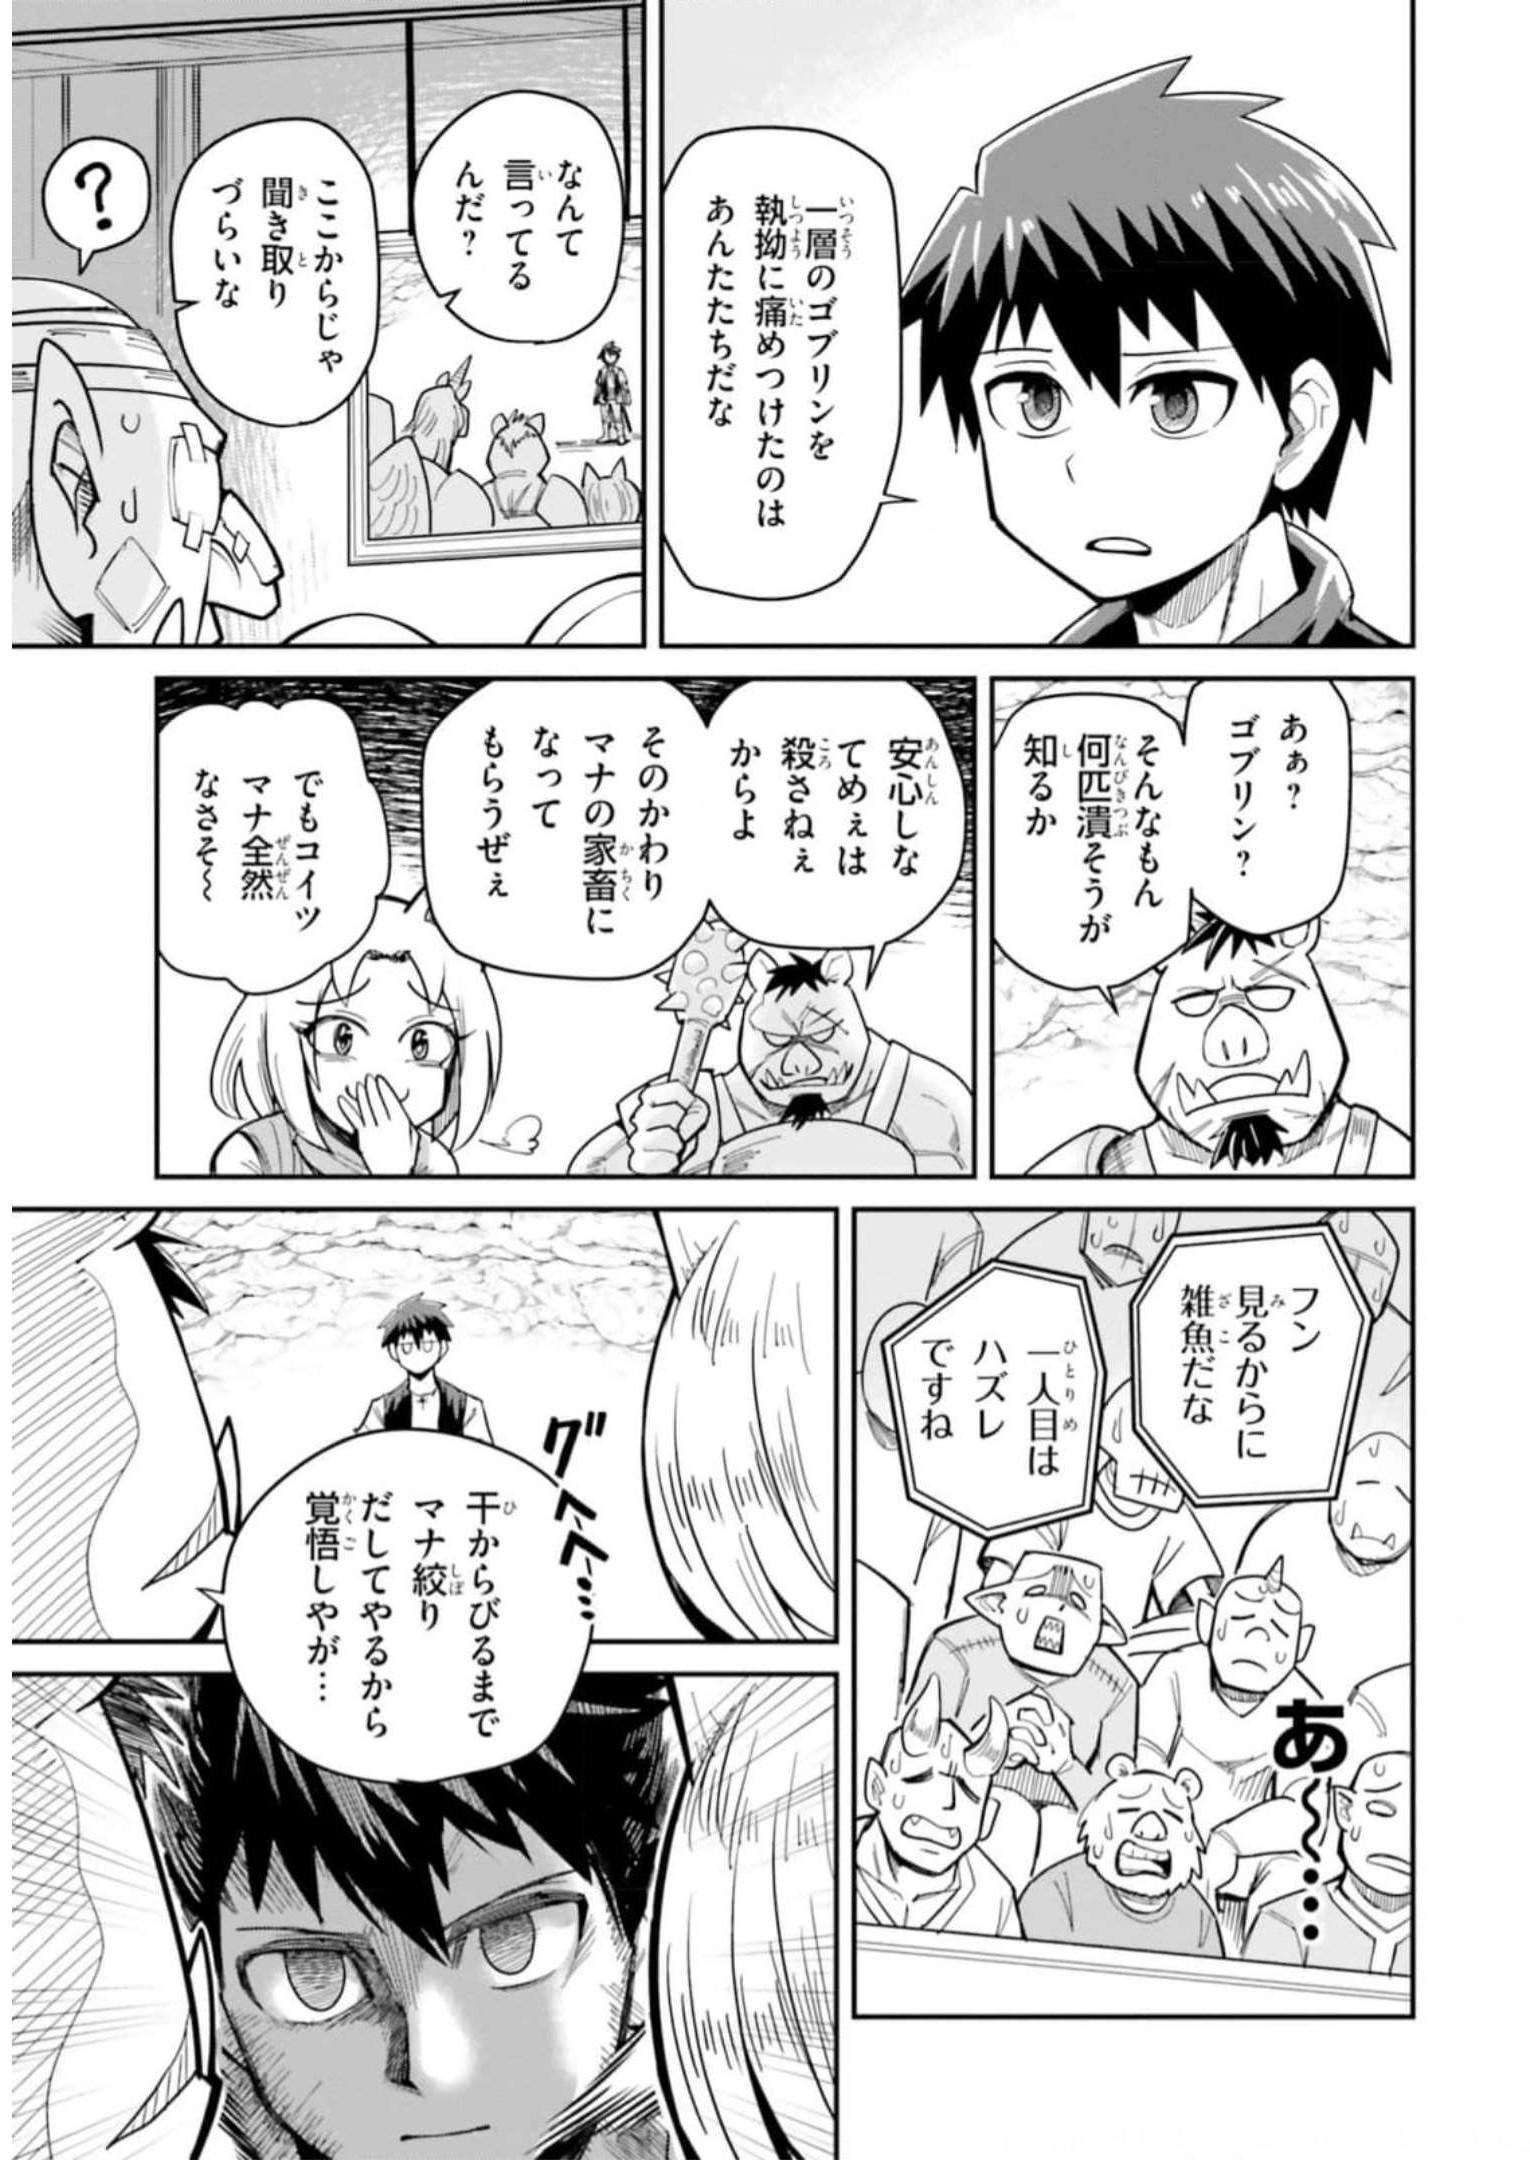 Dungeon Friends Forever Dungeon’s Childhood Friend ダンジョンの幼なじみ 第20話 - Page 23